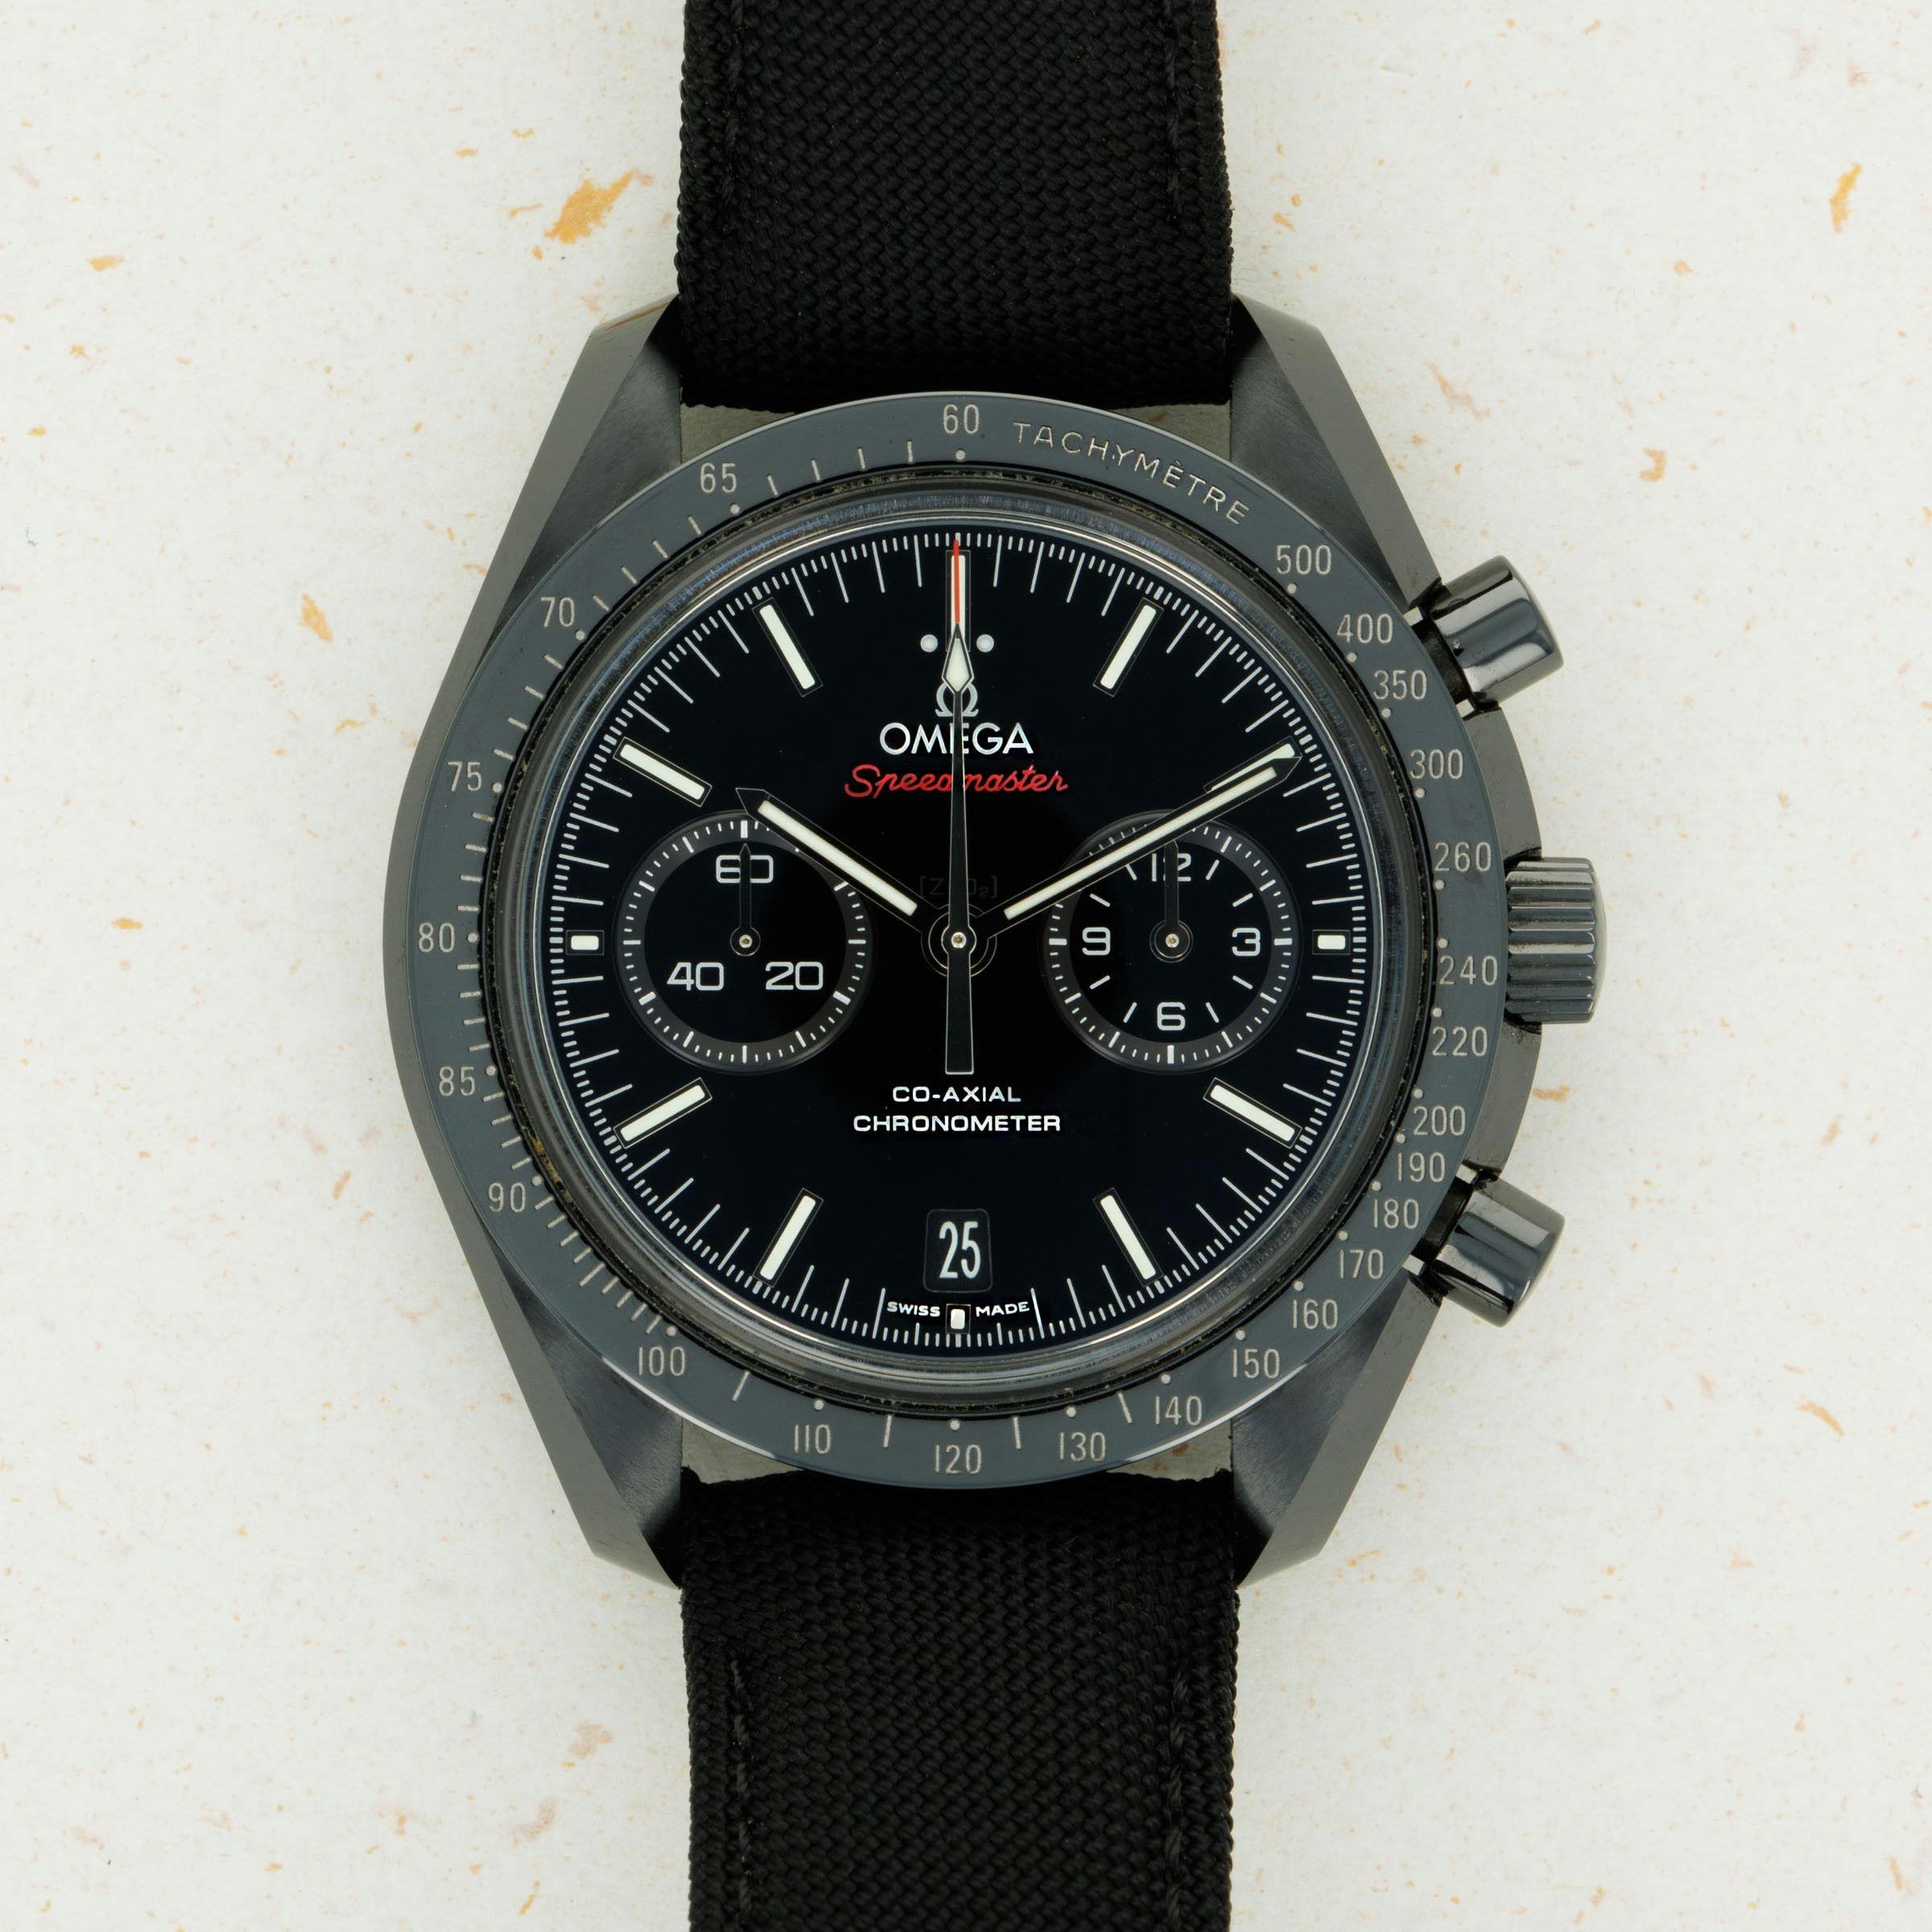 Thumbnail for Omega Speedmaster Dark Side of the Moon Co-Axial Chronometer 311.92.44.51.010.03